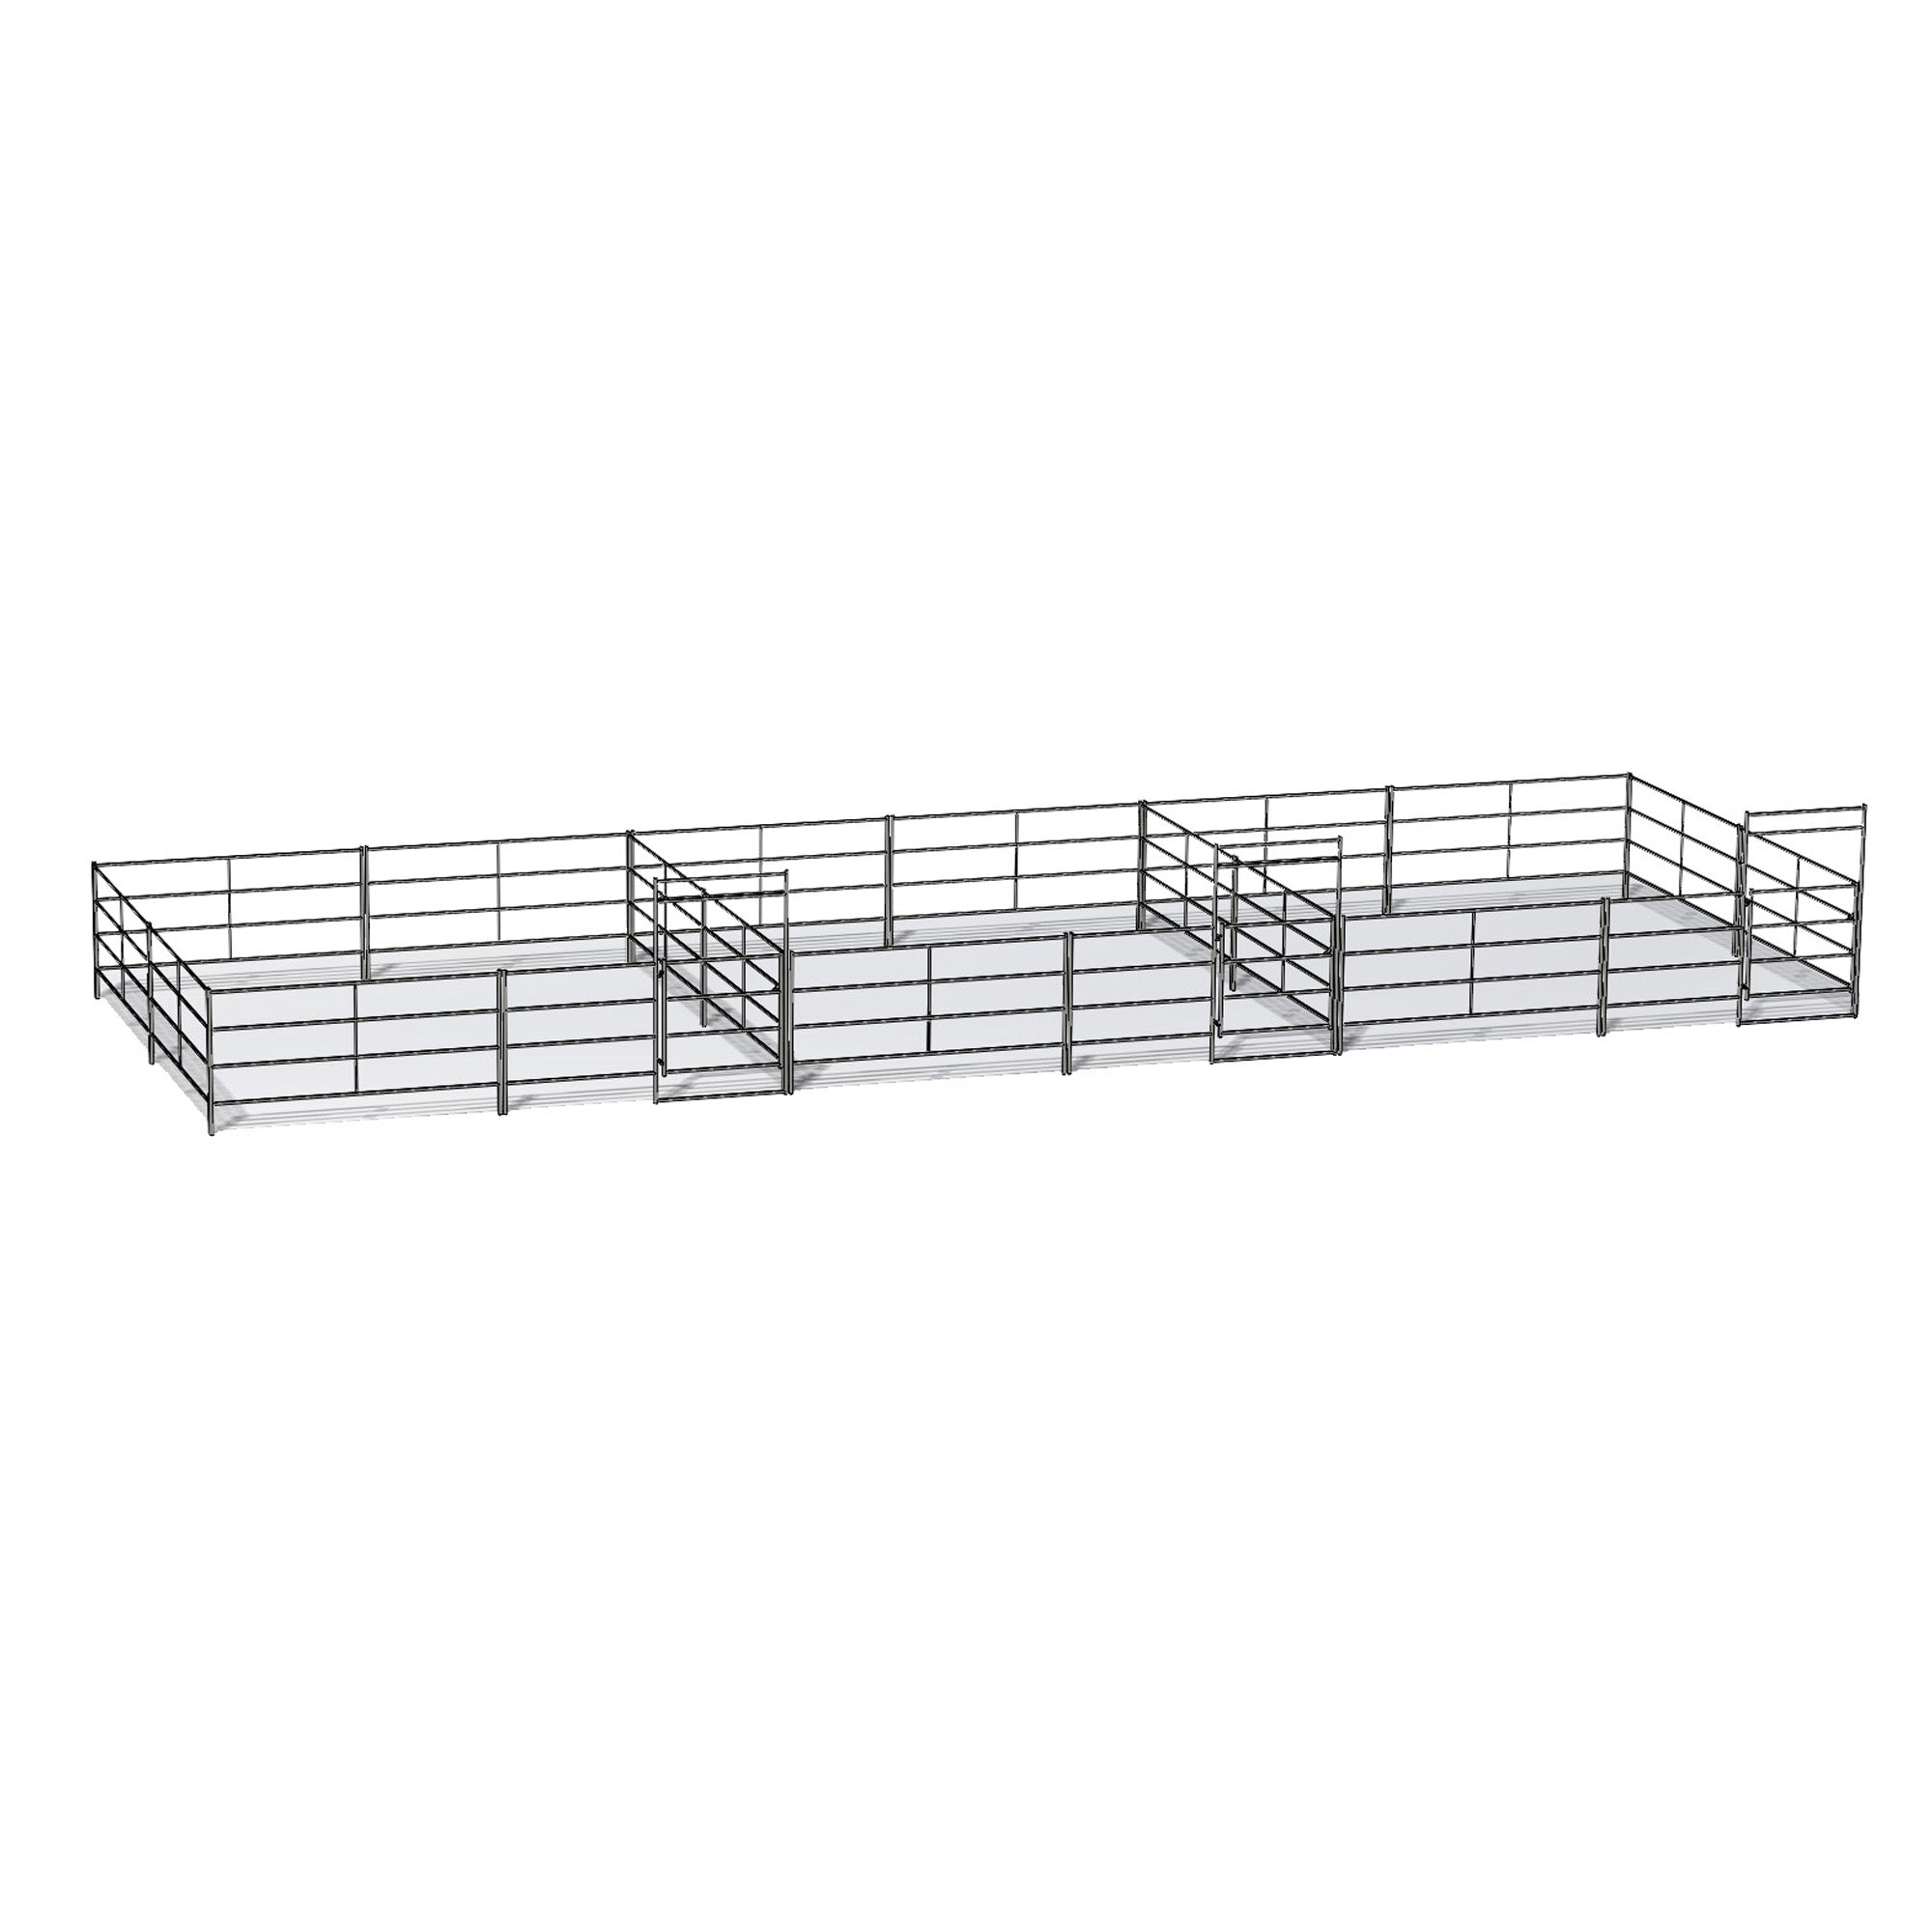 Three 20 Ft X 20 Ft Side by Side Stall Kit (5 Rail)